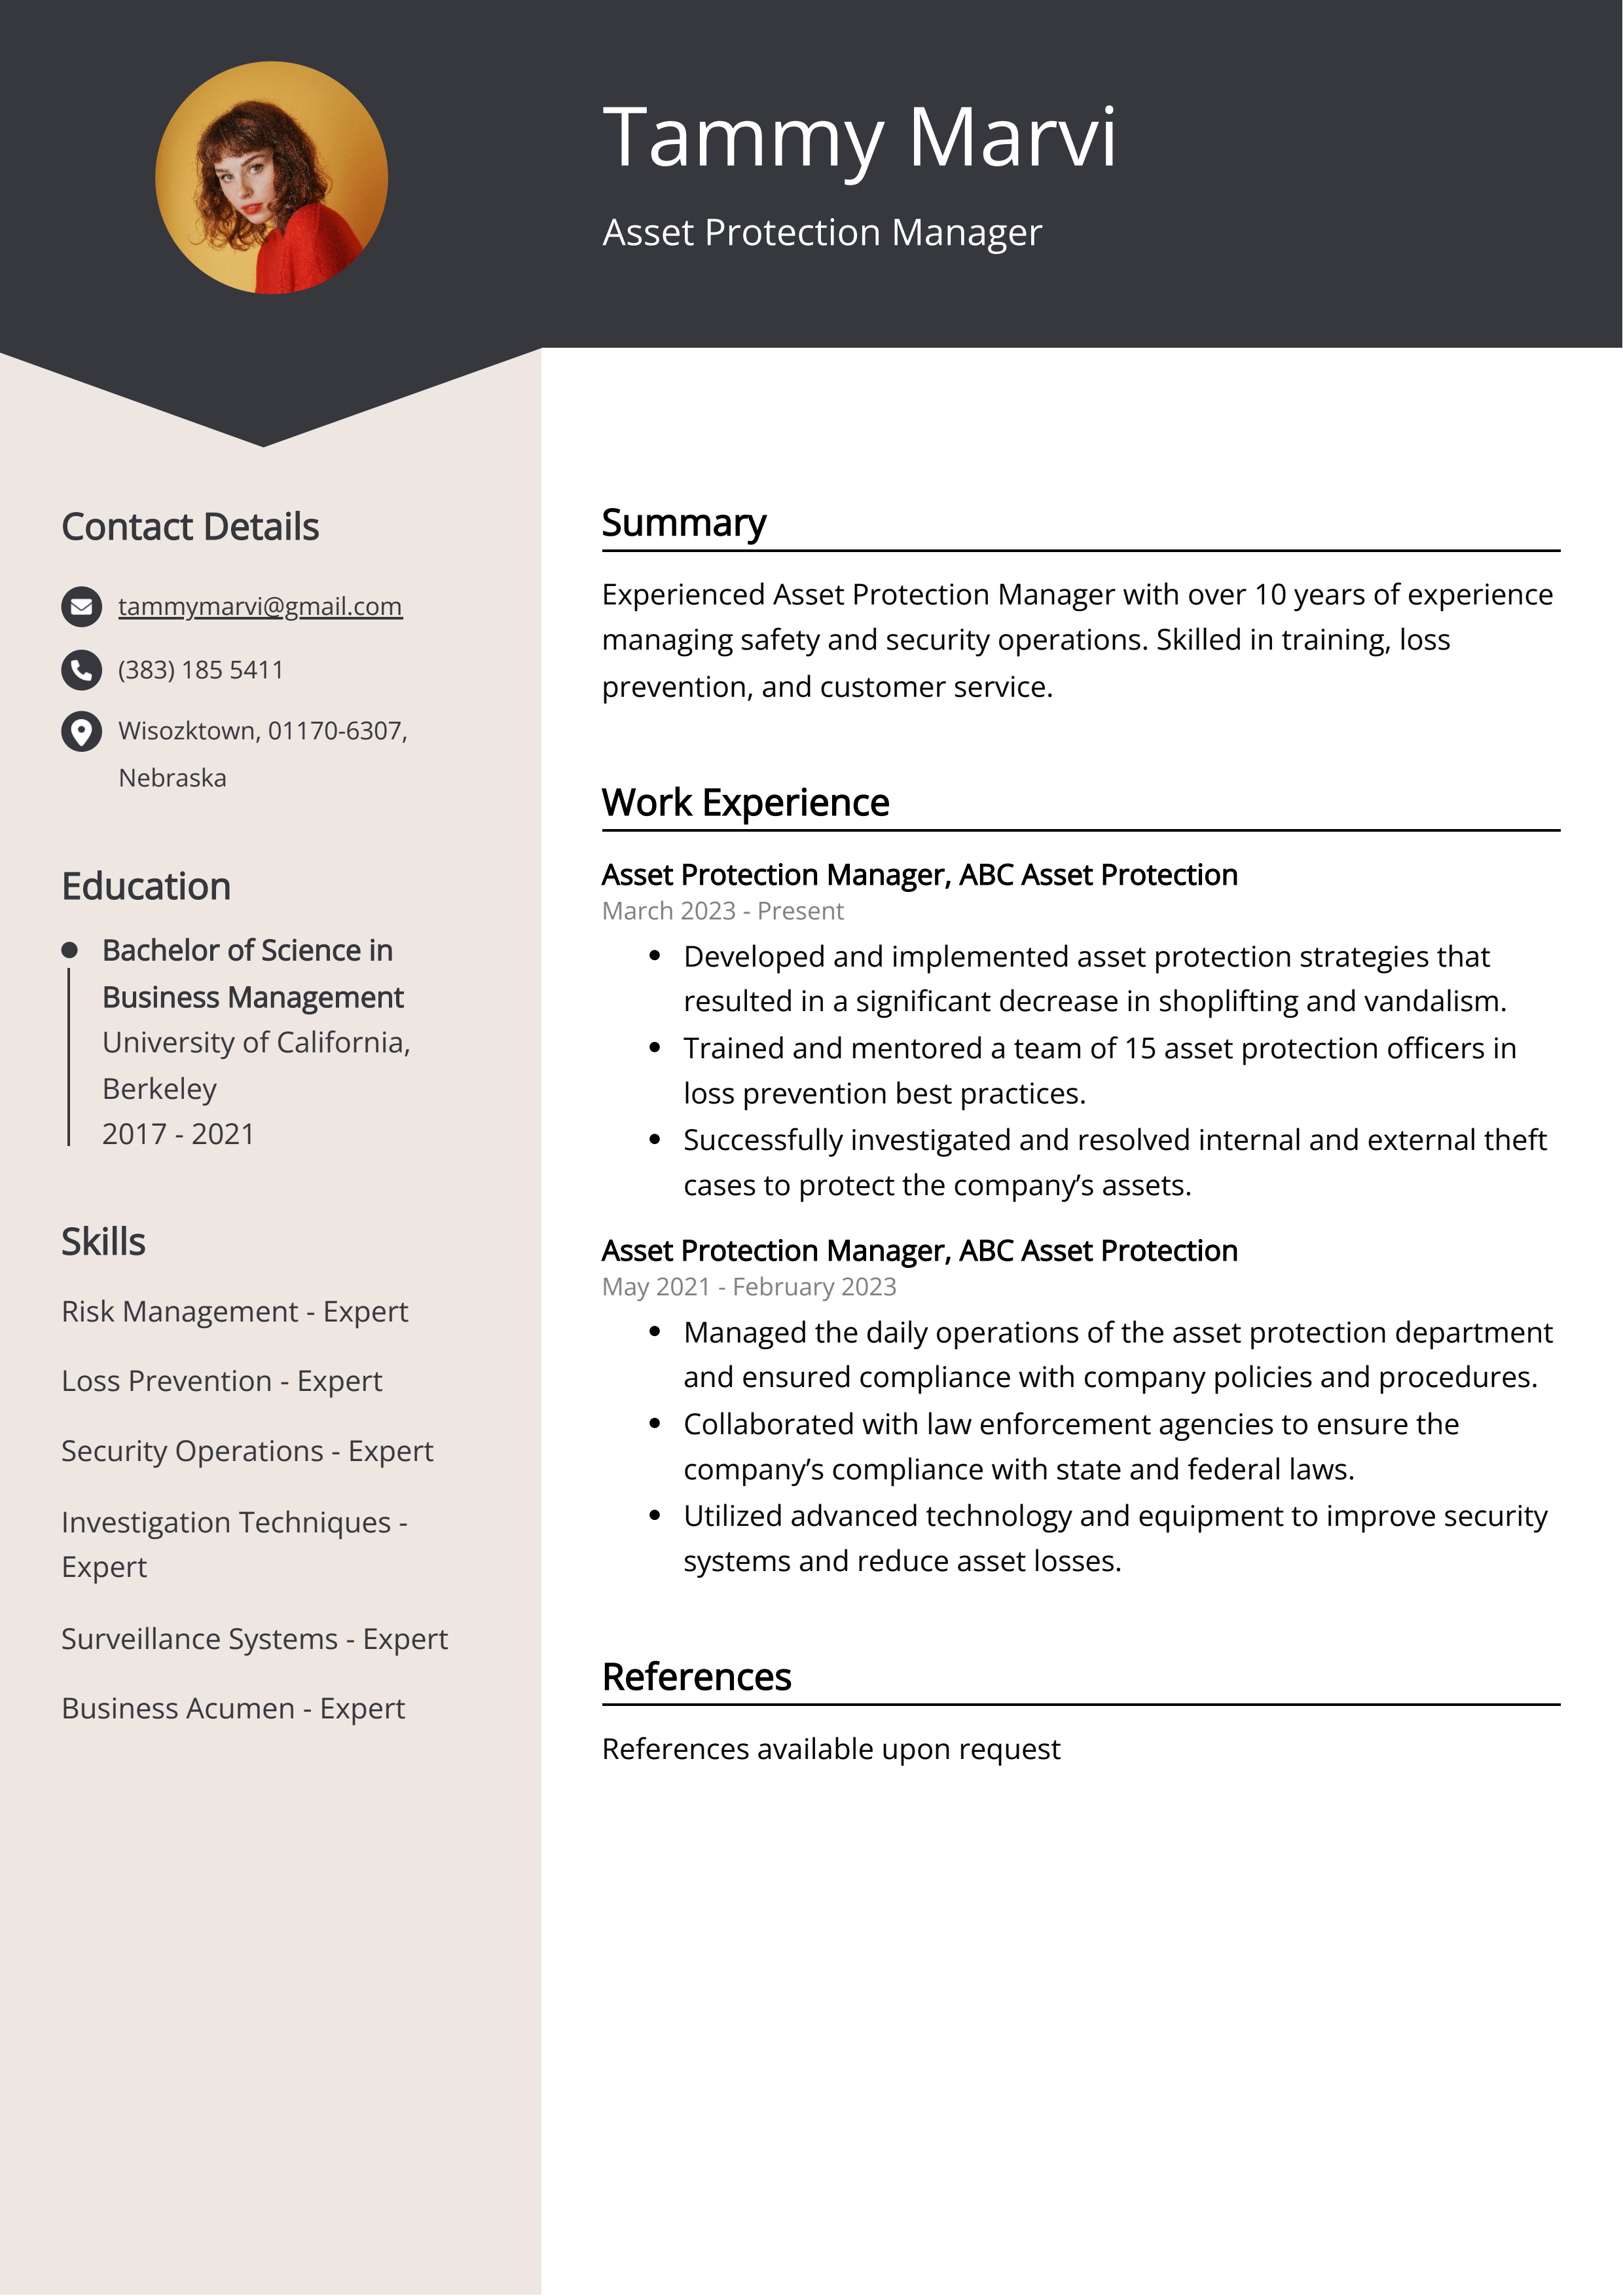 Asset Protection Manager CV Example